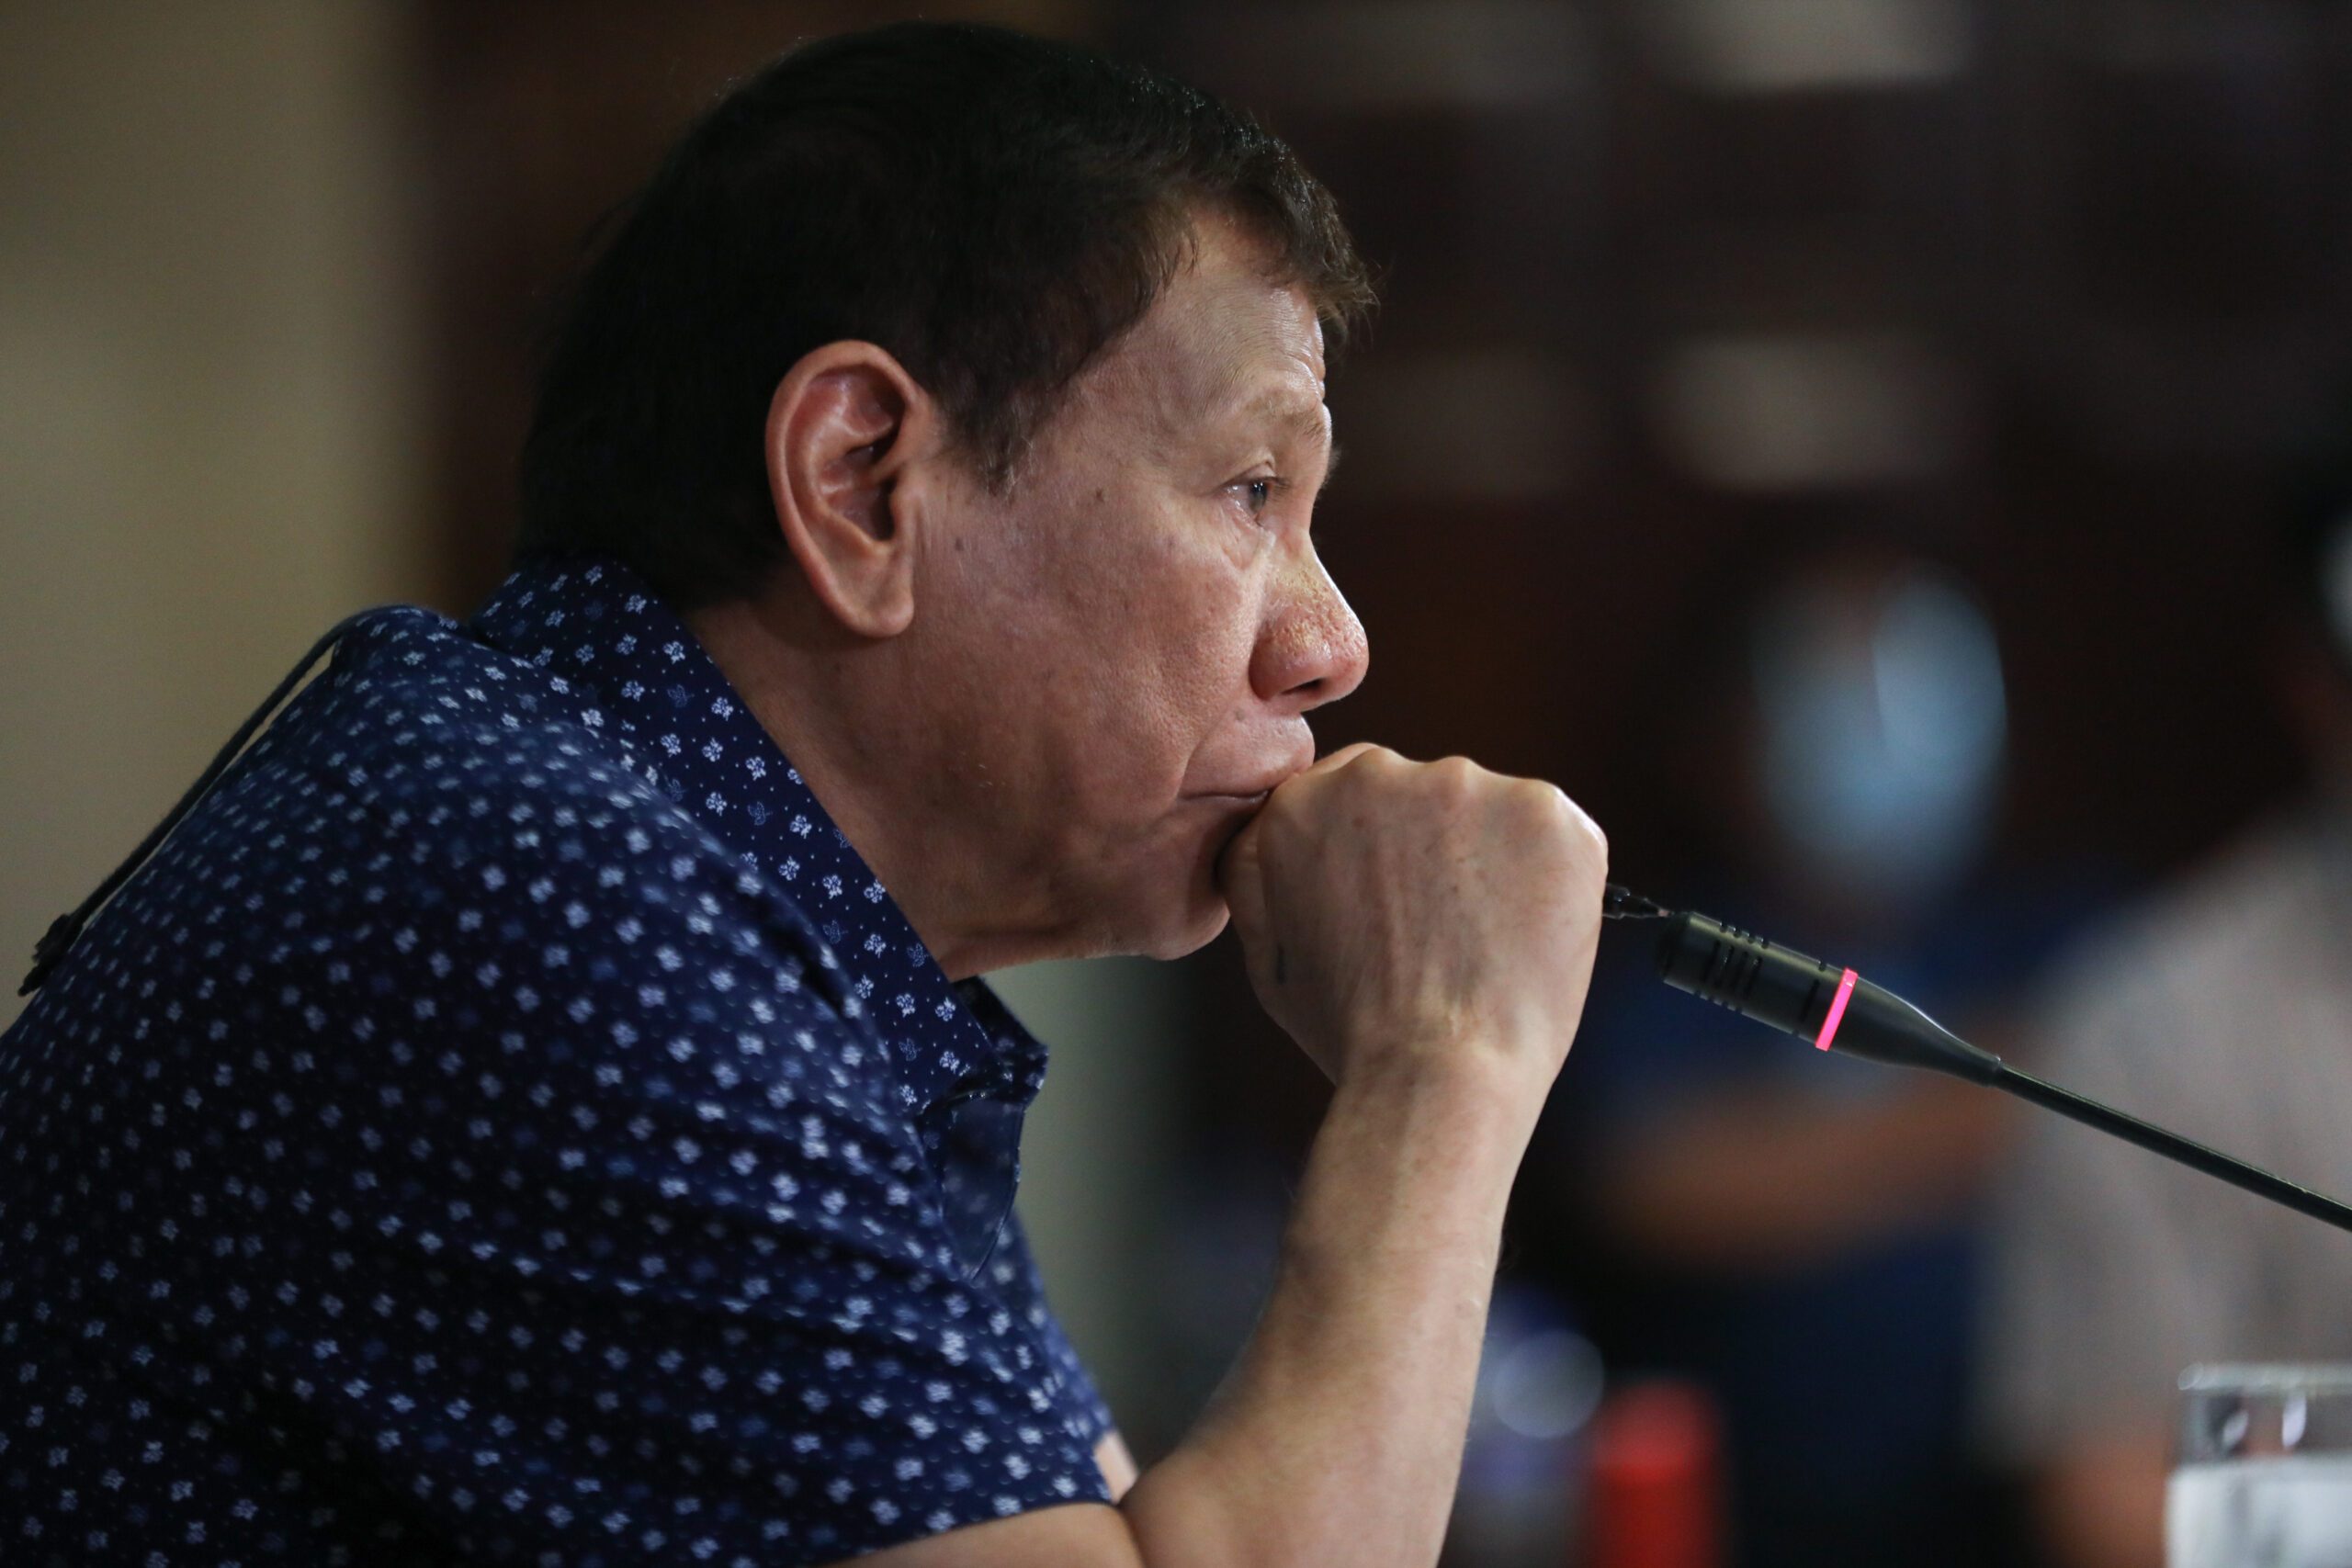 Luzon-wide lockdown after April 30 not needed, health experts tell Duterte